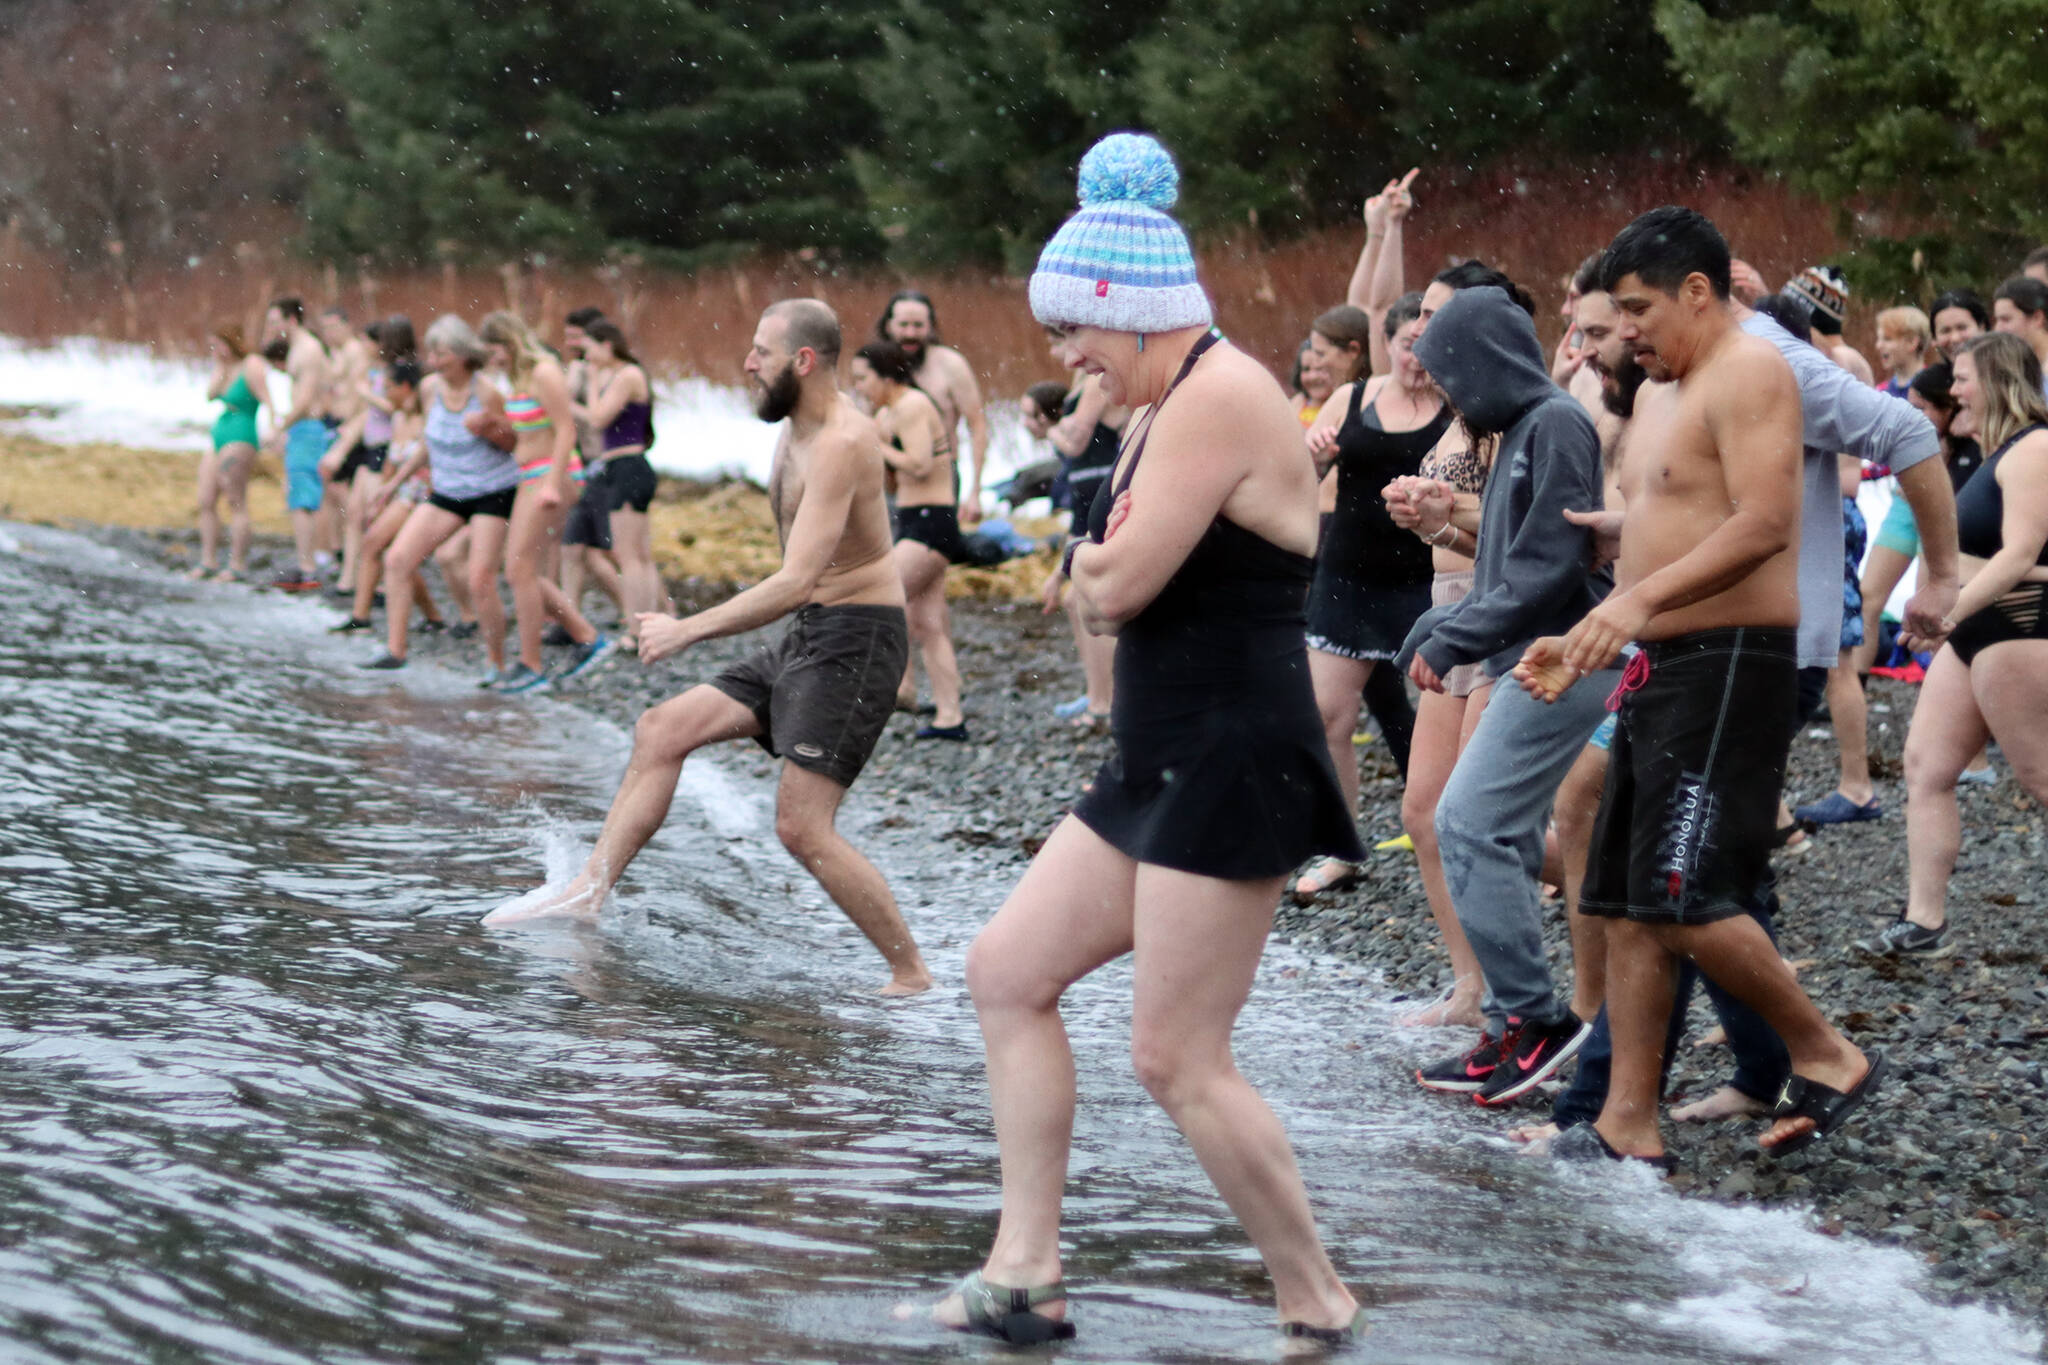 Participants move quickly but gingerly into the water at the 2022 Polar Dip held Saturday. (Ben Hohenstatt / Juneau Empire)